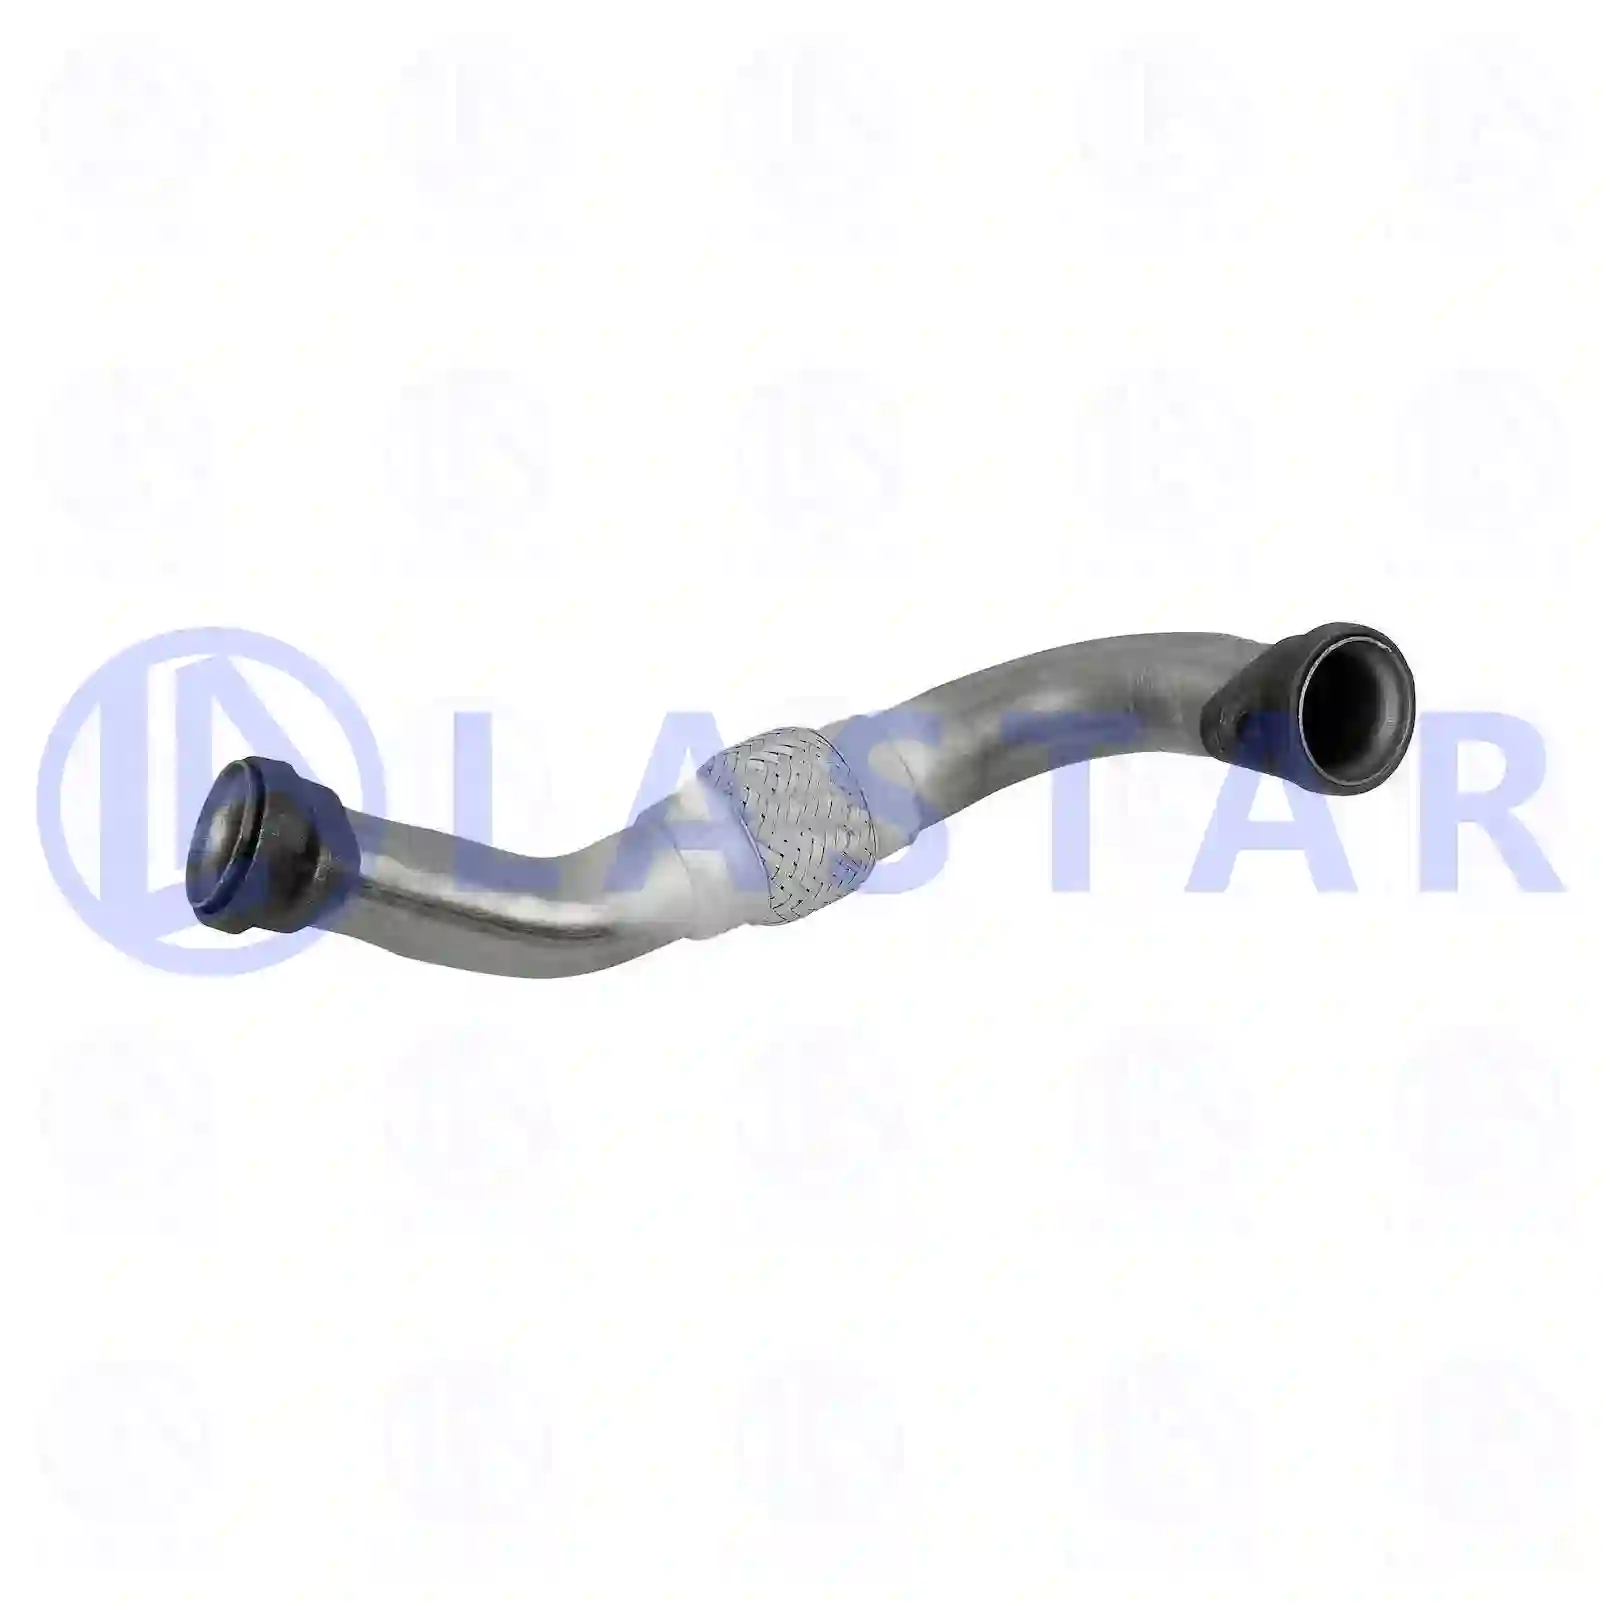 Exhaust manifold, 77702011, 5411401603, 5411402003, 5411402603, 5411403003 ||  77702011 Lastar Spare Part | Truck Spare Parts, Auotomotive Spare Parts Exhaust manifold, 77702011, 5411401603, 5411402003, 5411402603, 5411403003 ||  77702011 Lastar Spare Part | Truck Spare Parts, Auotomotive Spare Parts